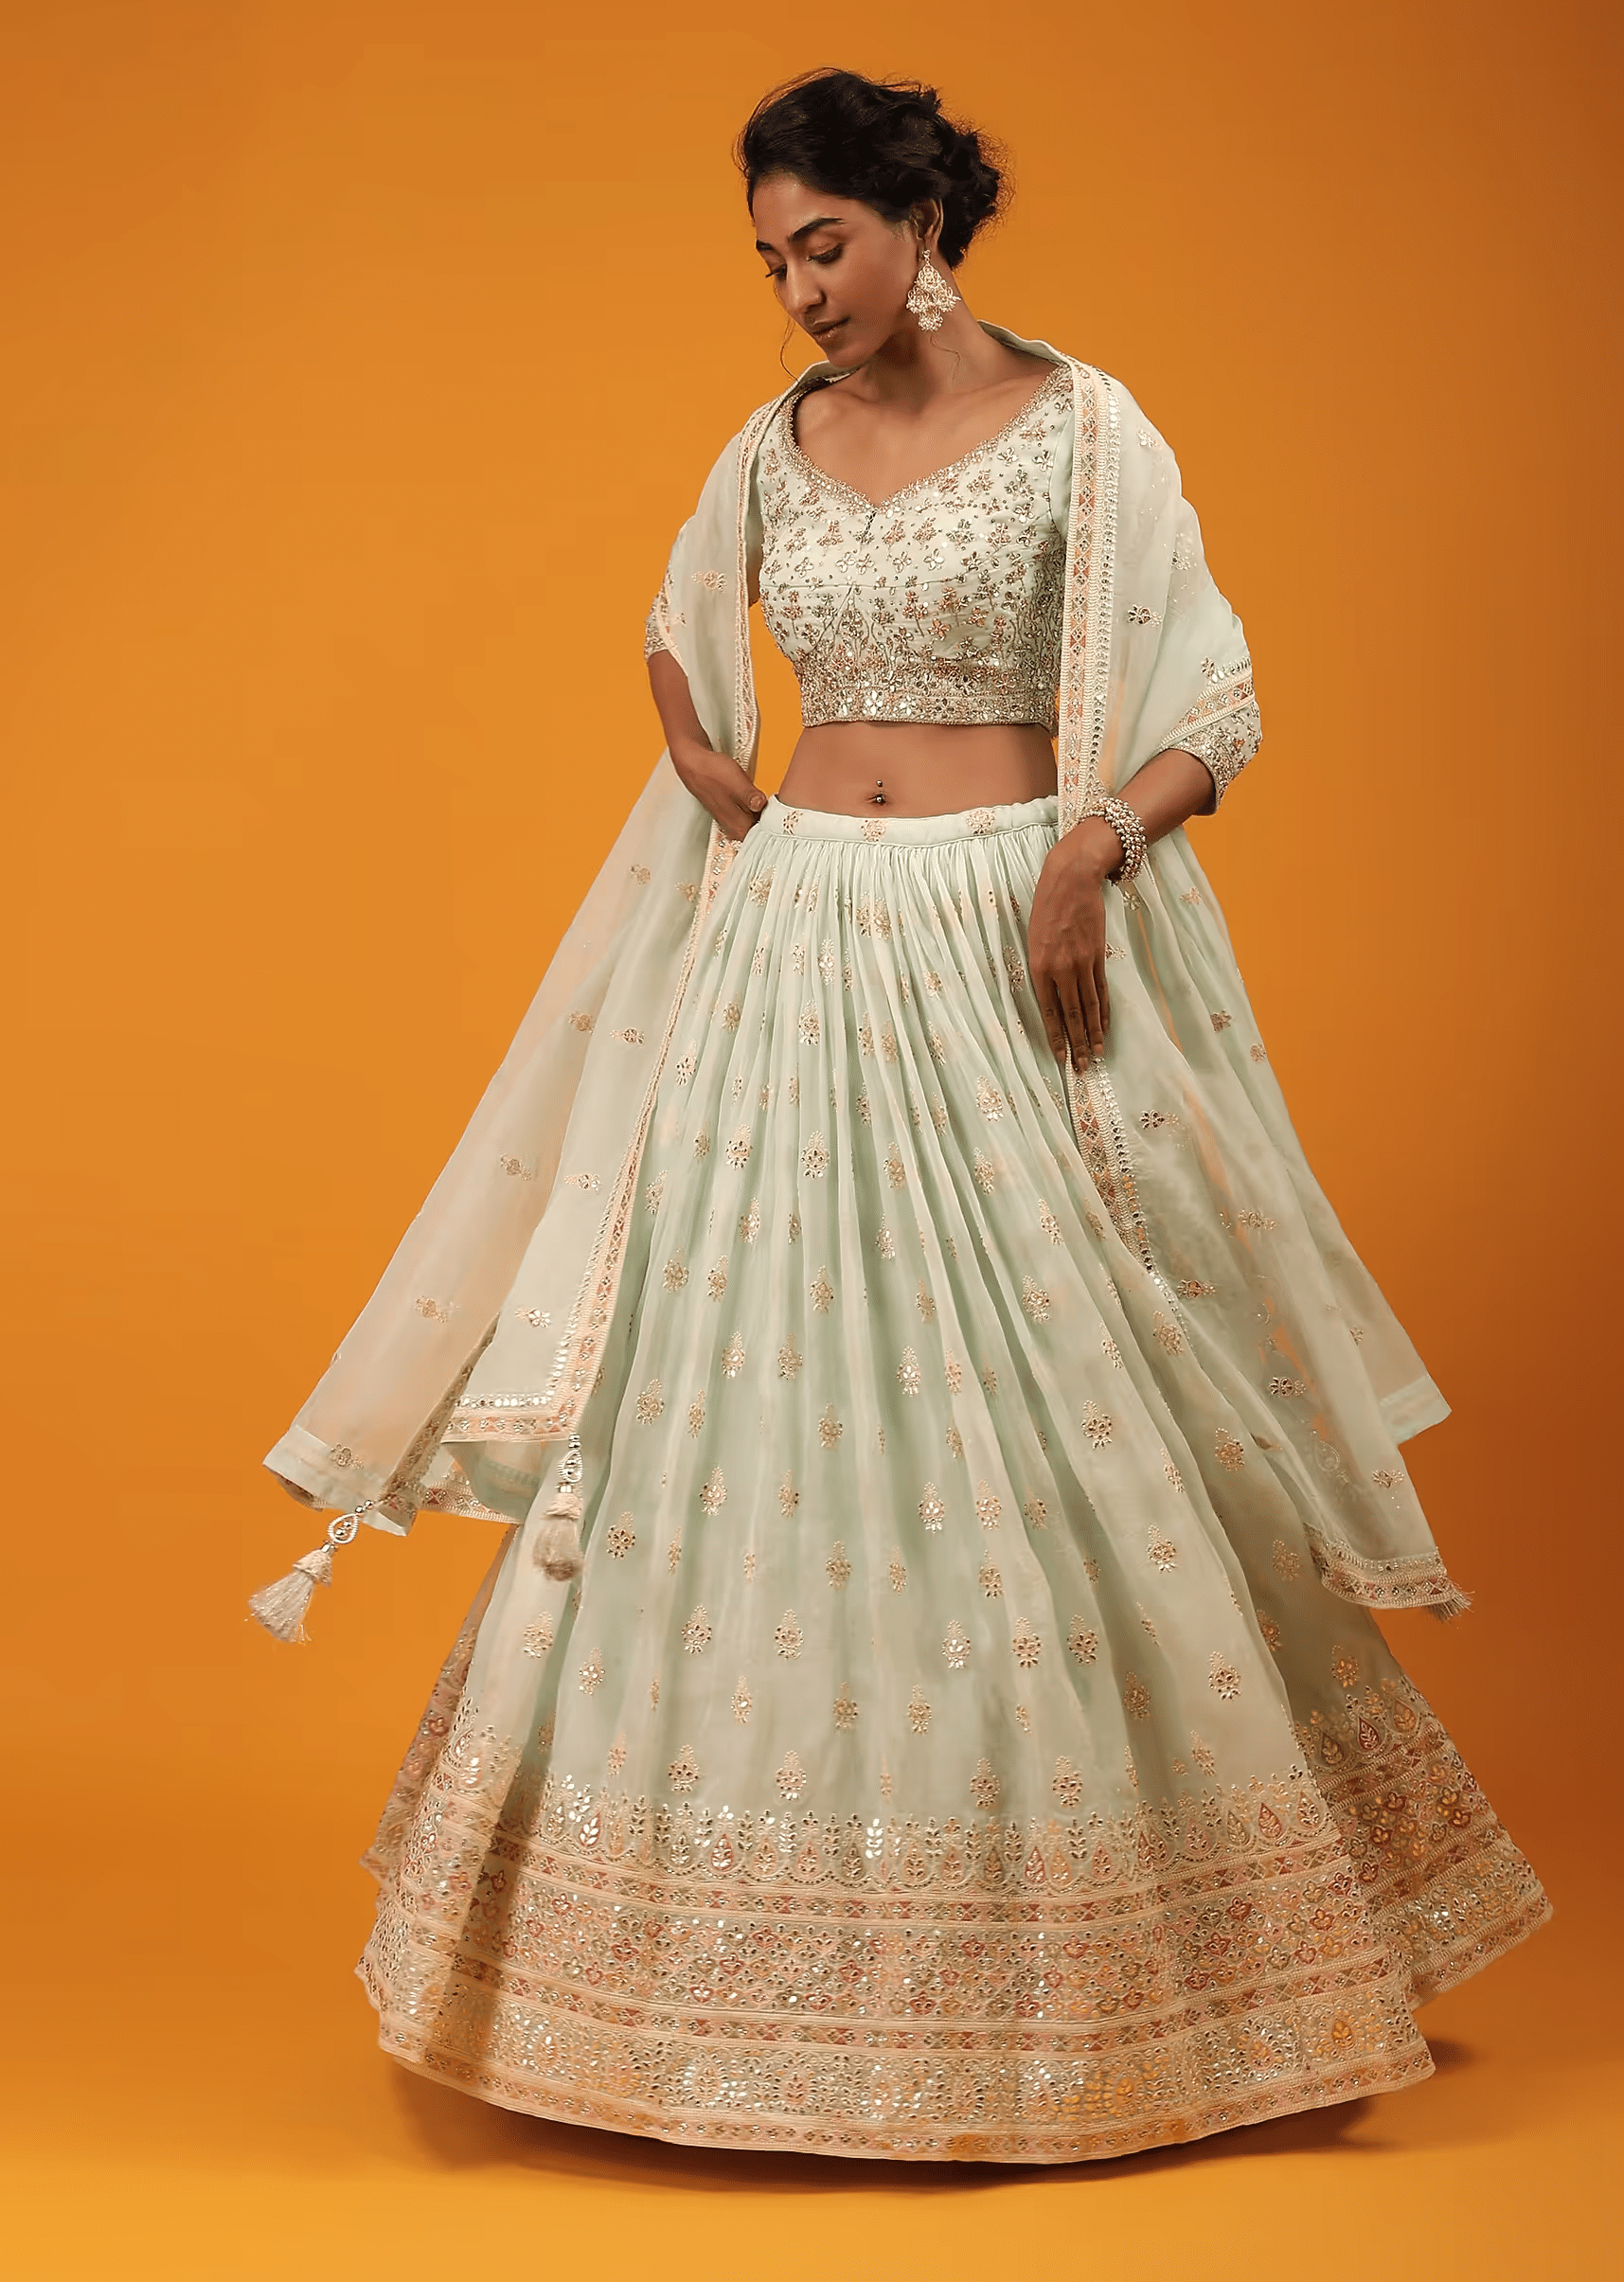 Honeydew Green Lehenga And Crop Top With Multi Colored Lucknowi Work In Floral Pattern